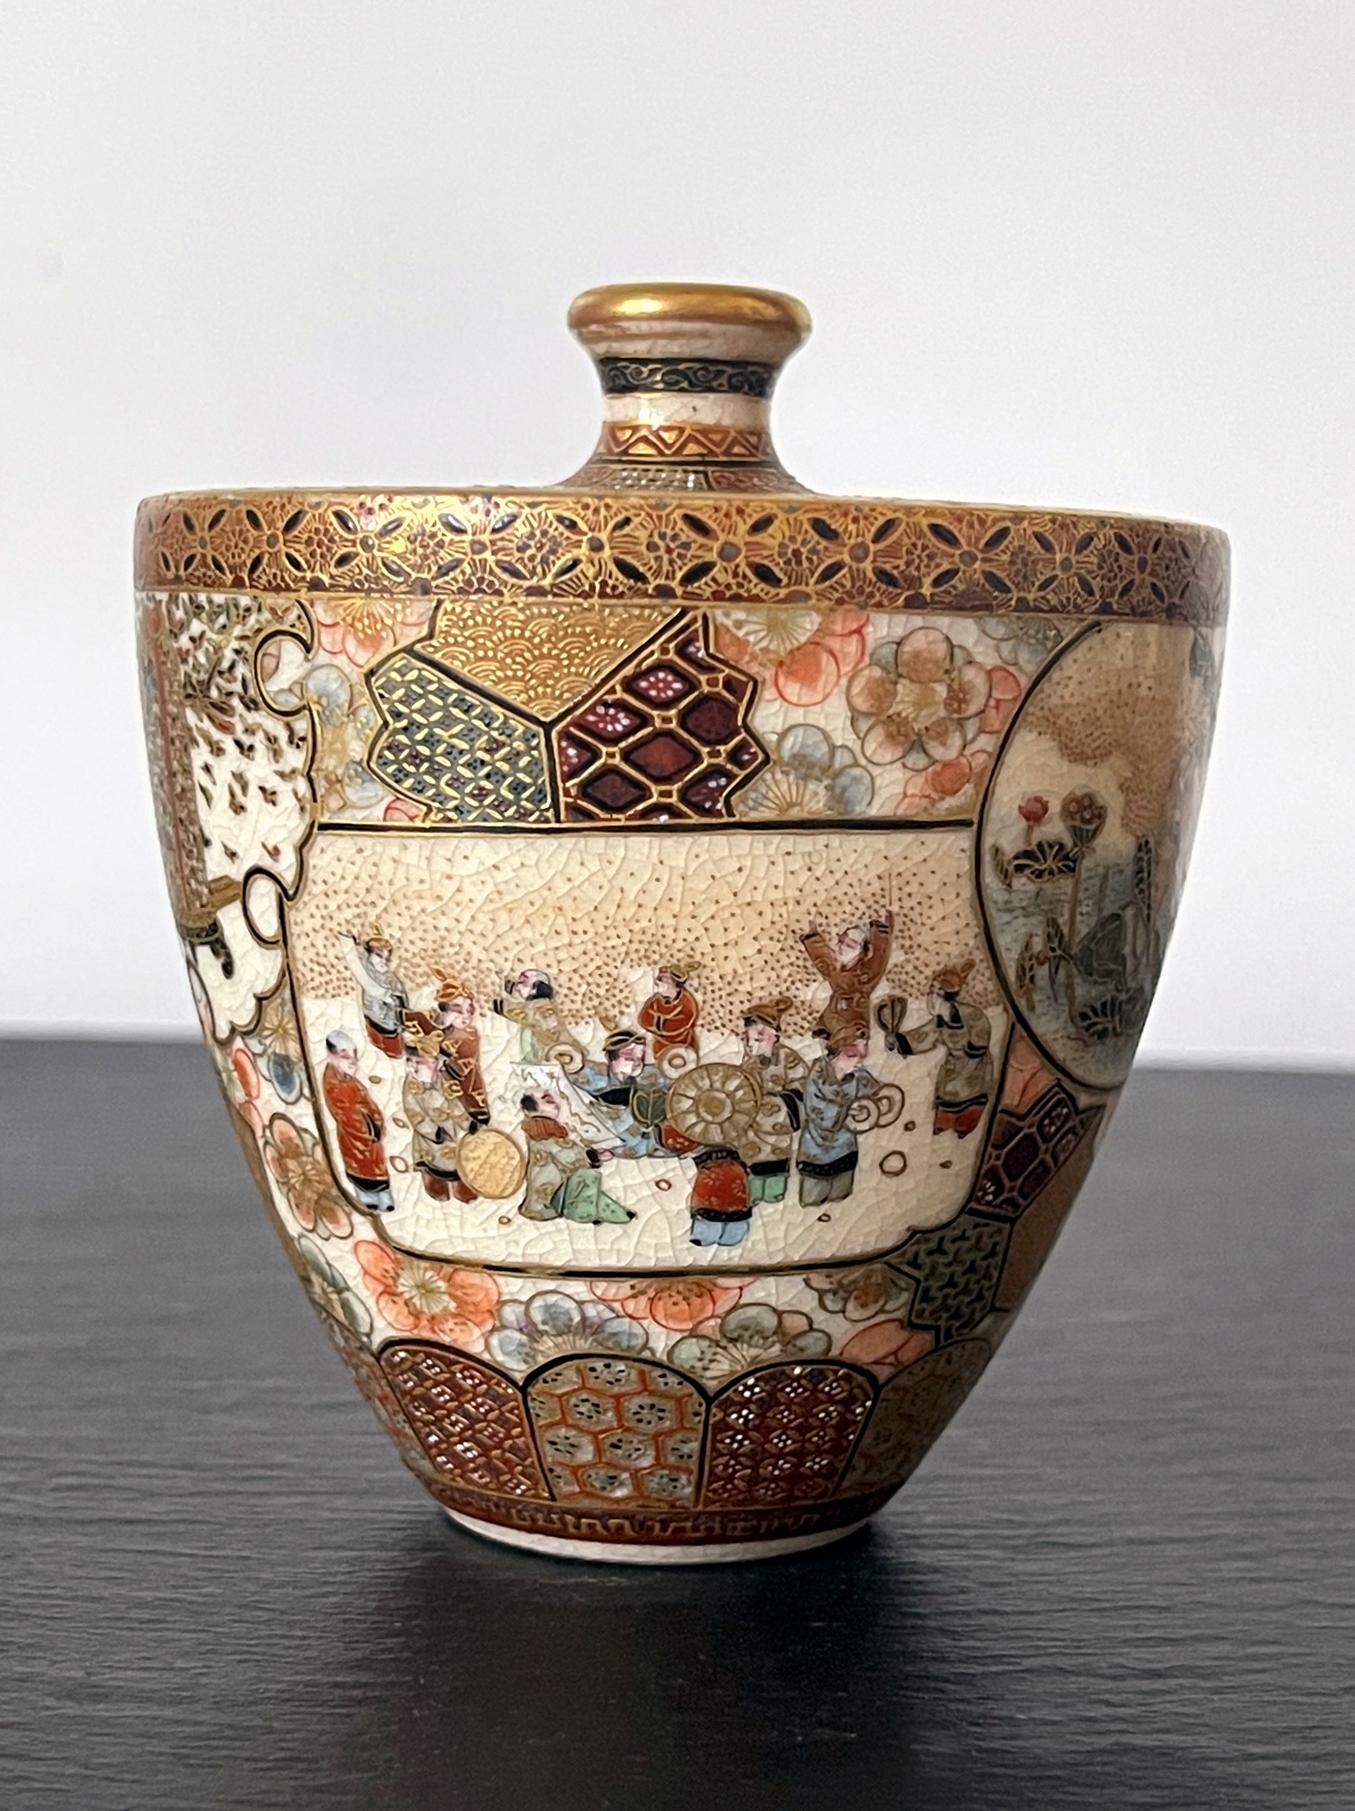 A very fine miniature ceramic vase in satsuma ware by Taizan Yohei (1864-1922) circa 1880-1890s of late Meiji period. The vase with a broad flat shoulder was lavishly decorated with colored enamels in merticulous details. On the background of mixed